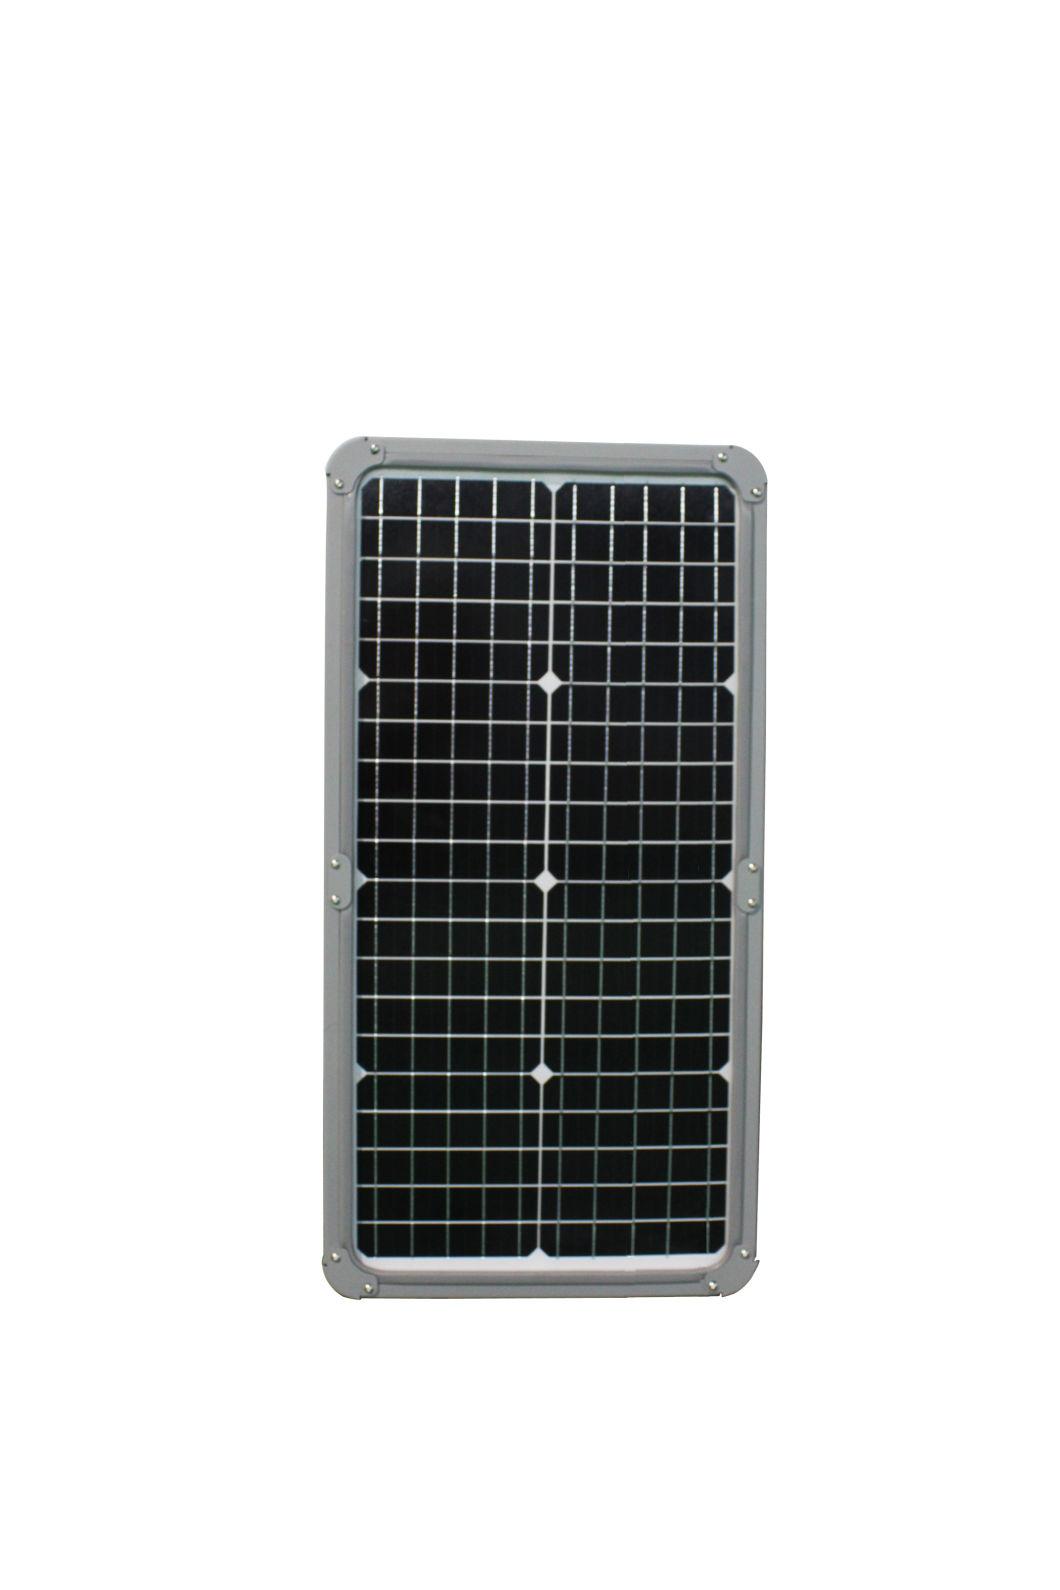 20W 30W 50W 60W 80W 100W Split Fixtures Integrated Solar LED Street Light with Mono Panel and LiFePO4 Battery Separated for Public Parking Lot Area